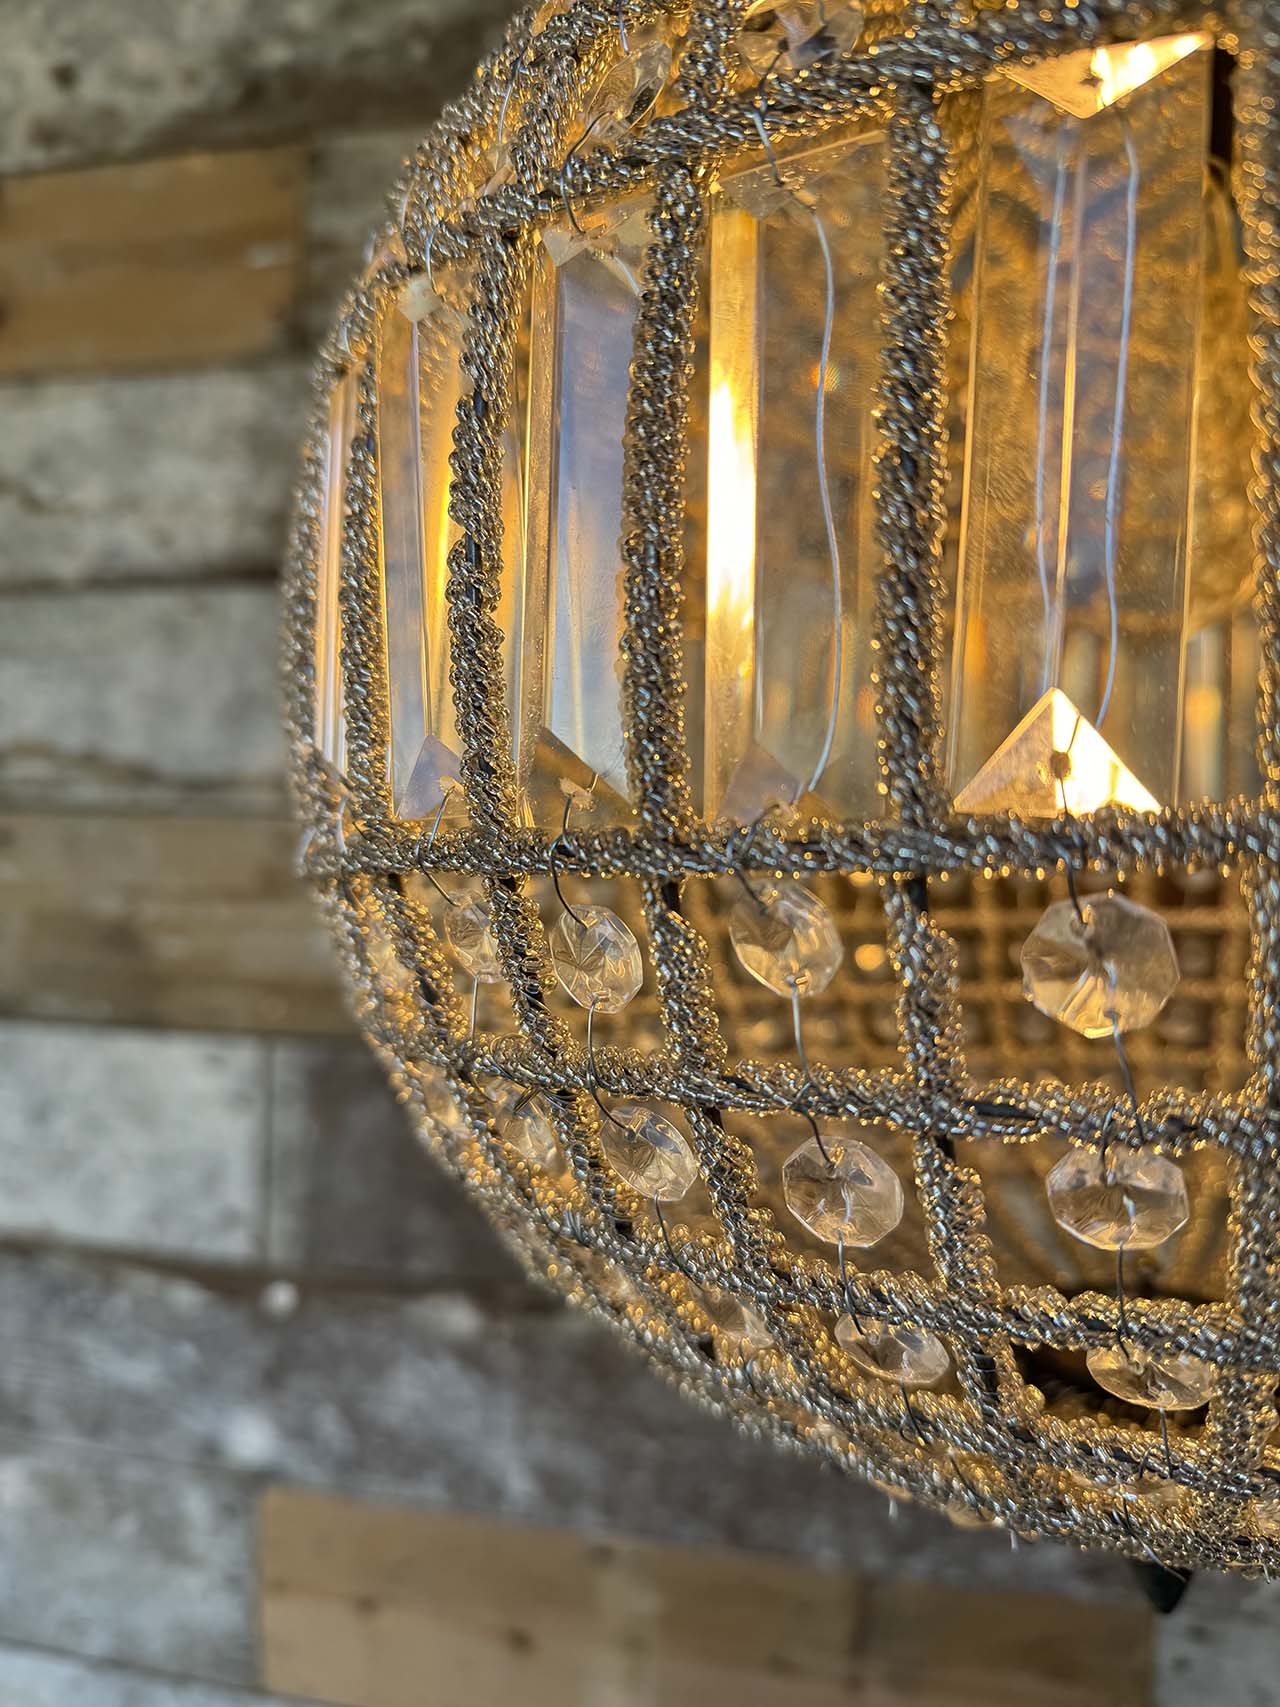 Small ball chandelier